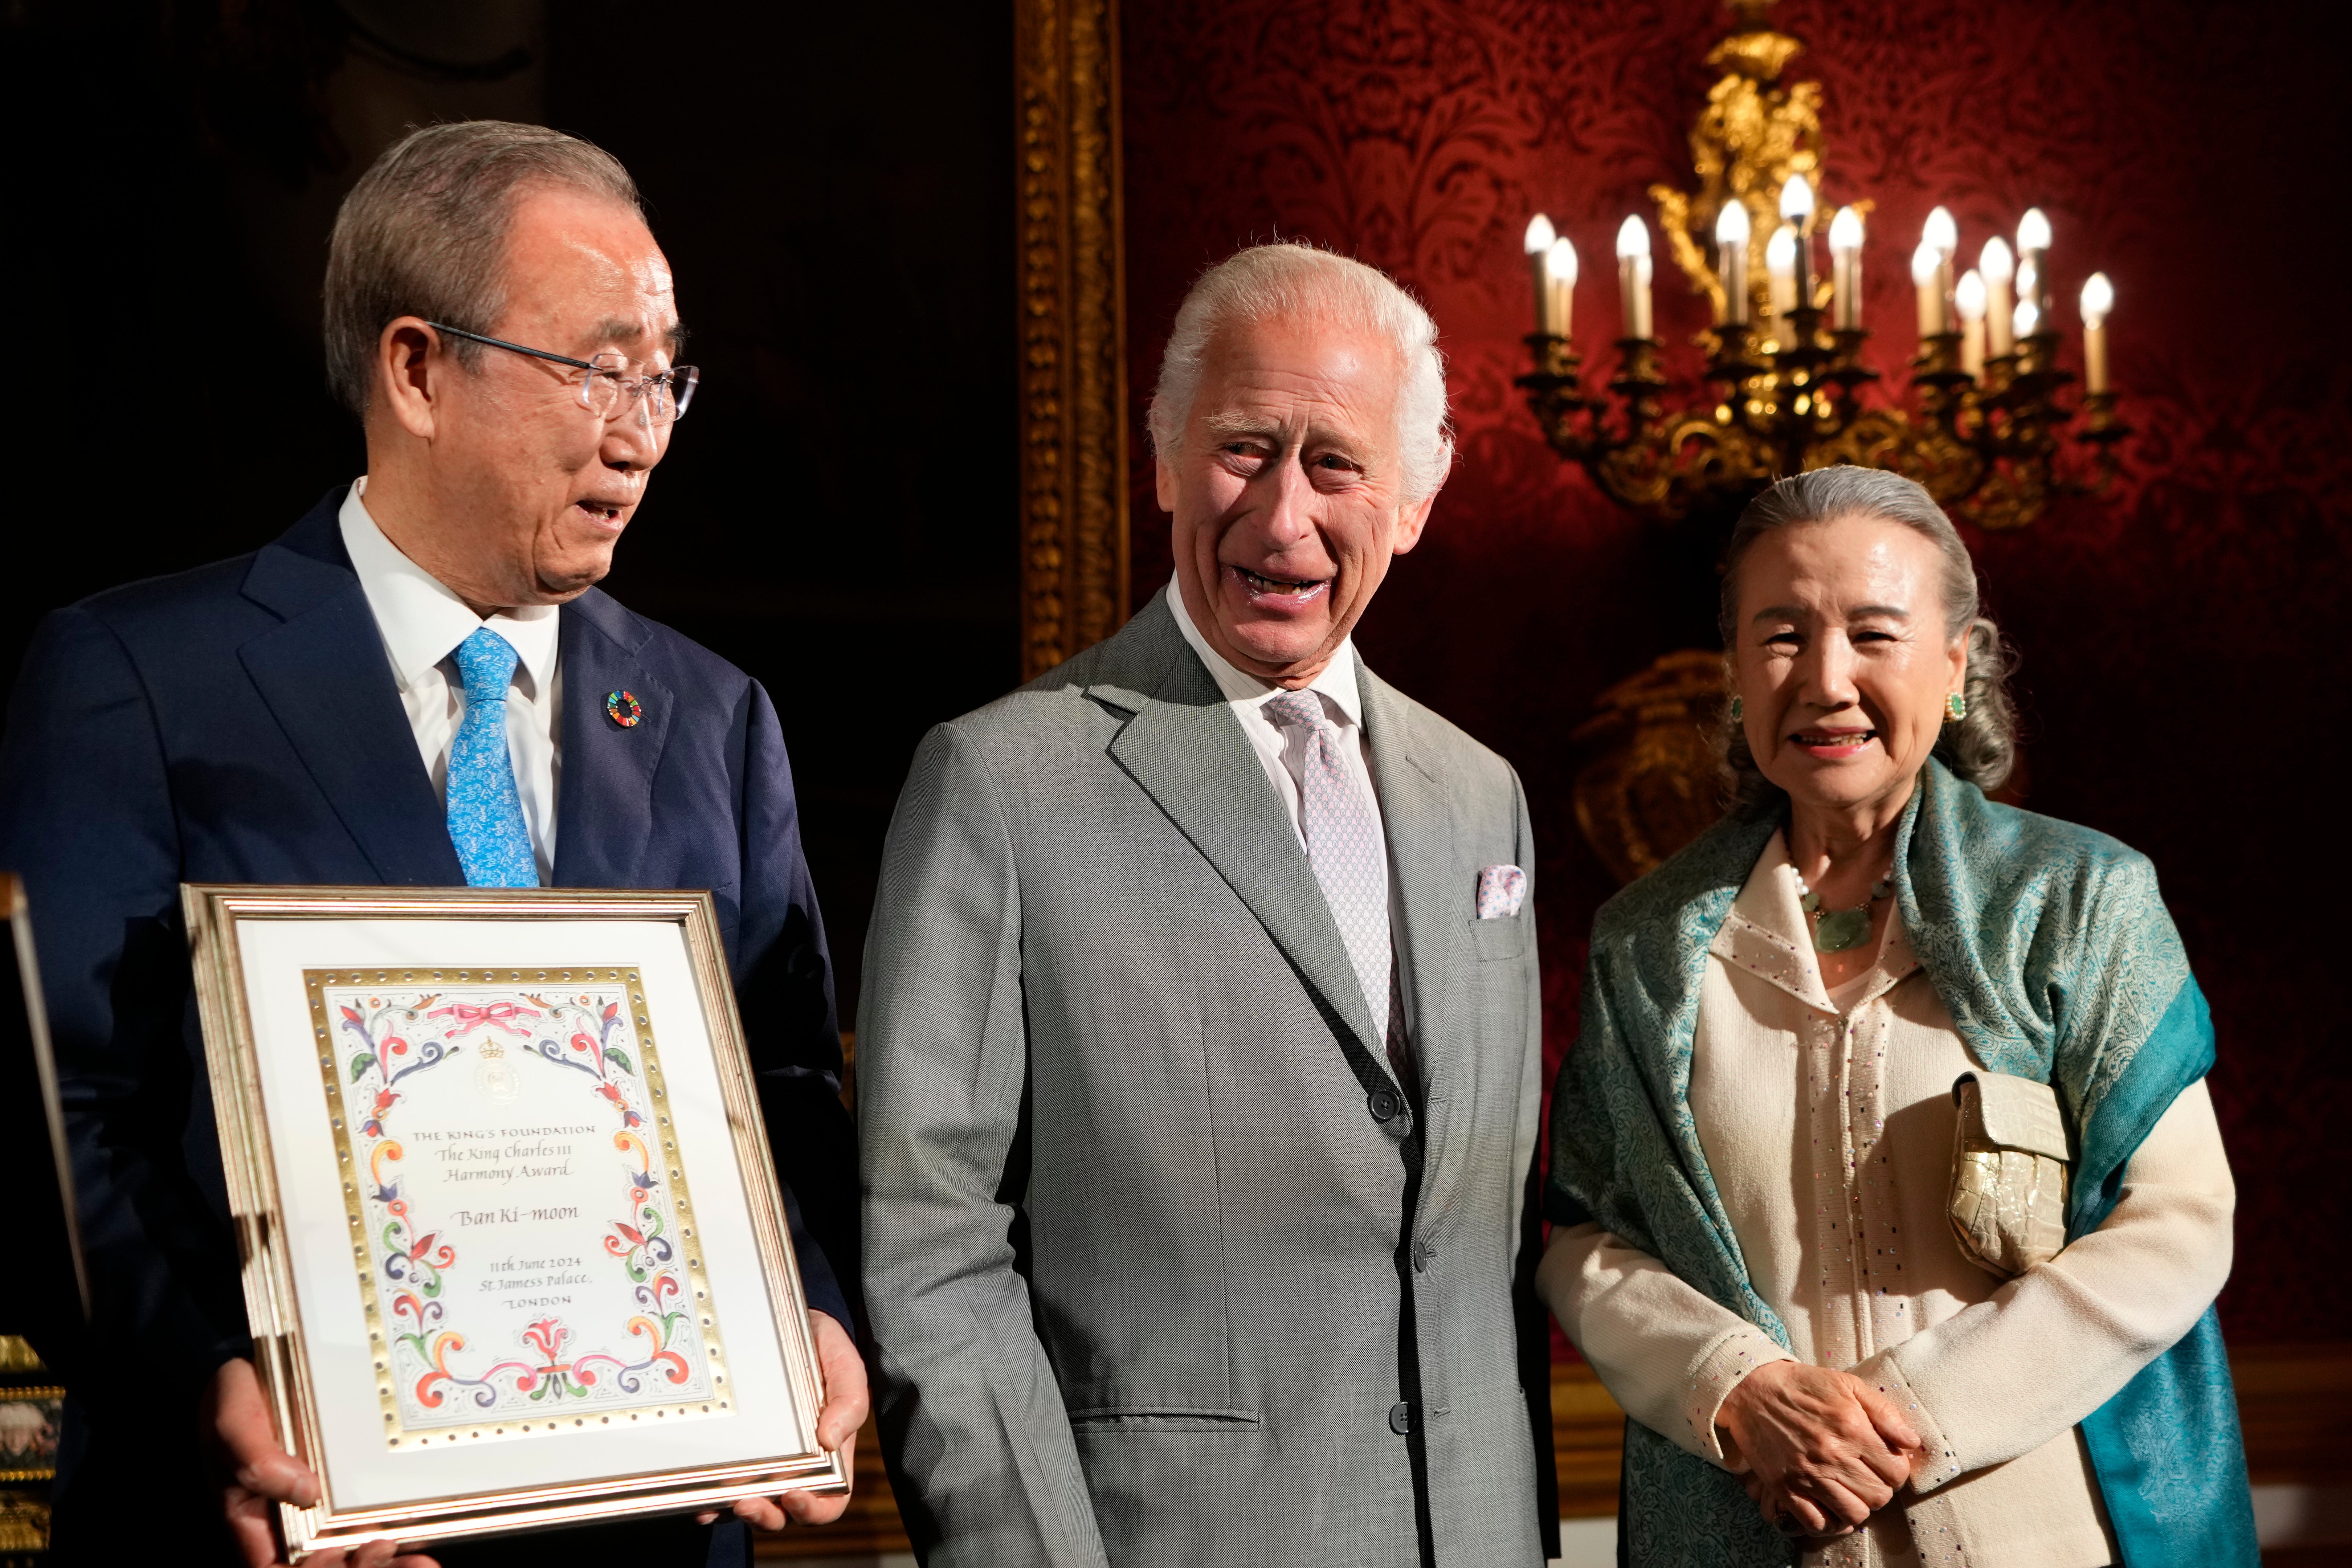 King Charles III (centre) presents the Harmony Award to Ban Ki-moon (left), the former United Nations Secretary General, at the King's Foundation charity's inaugural awards at St James's Palace